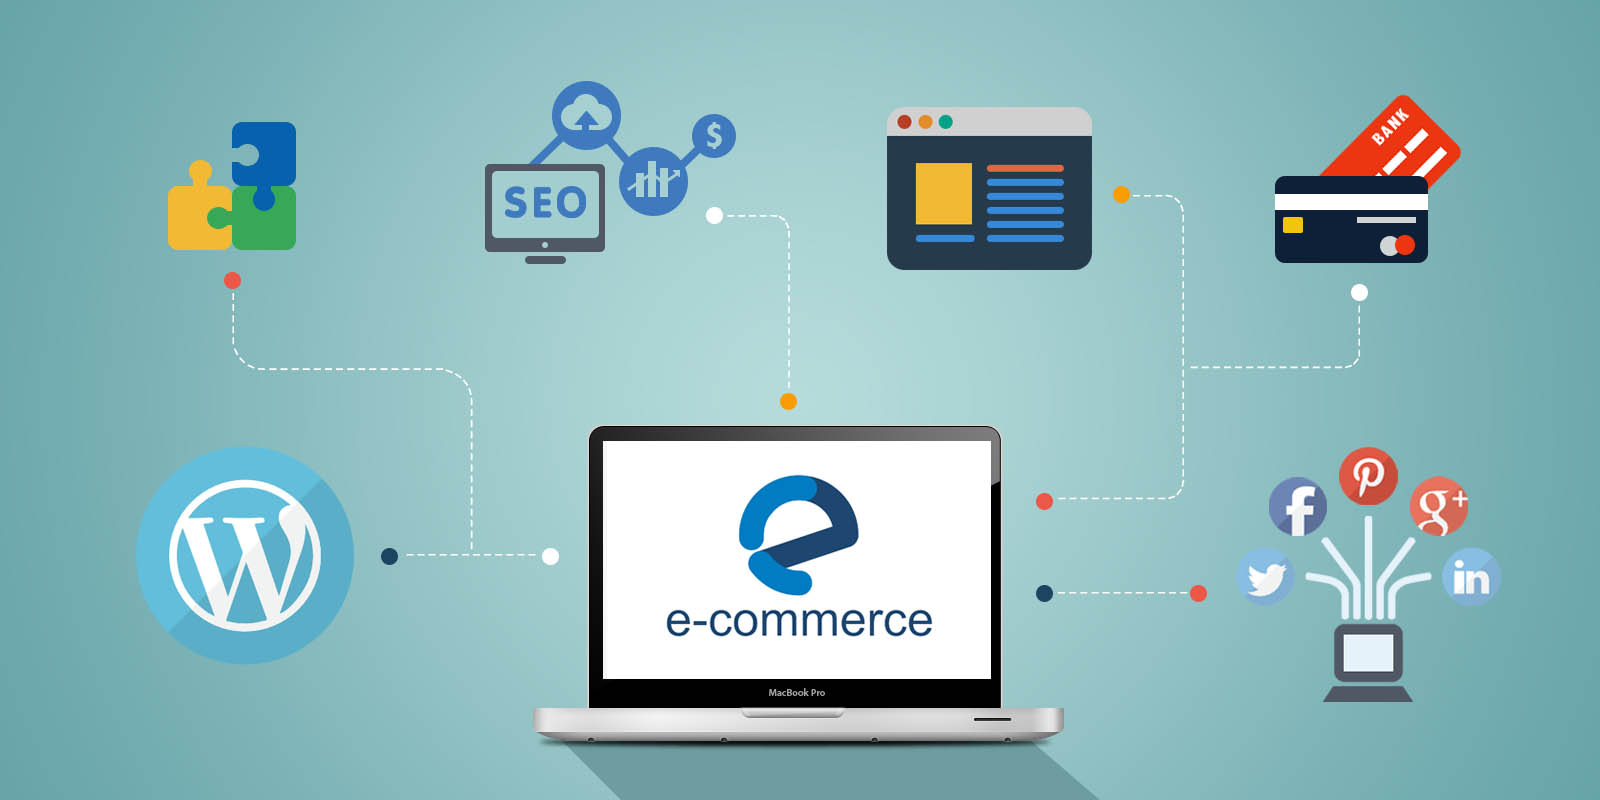 How to Set Up an E-Commerce Site